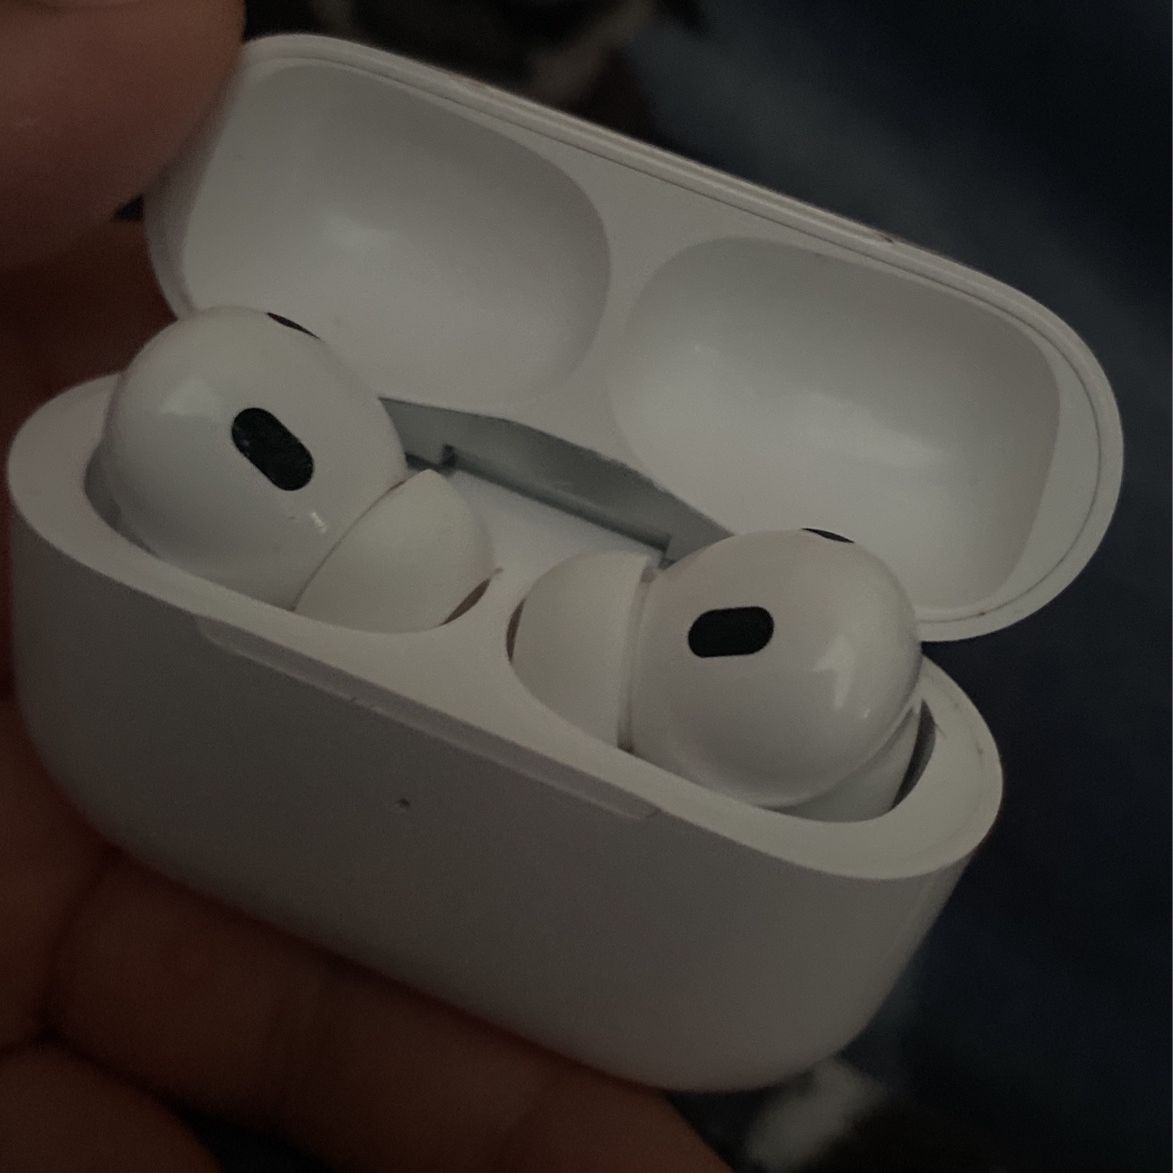 Air Pod Pros Second Gen (used)